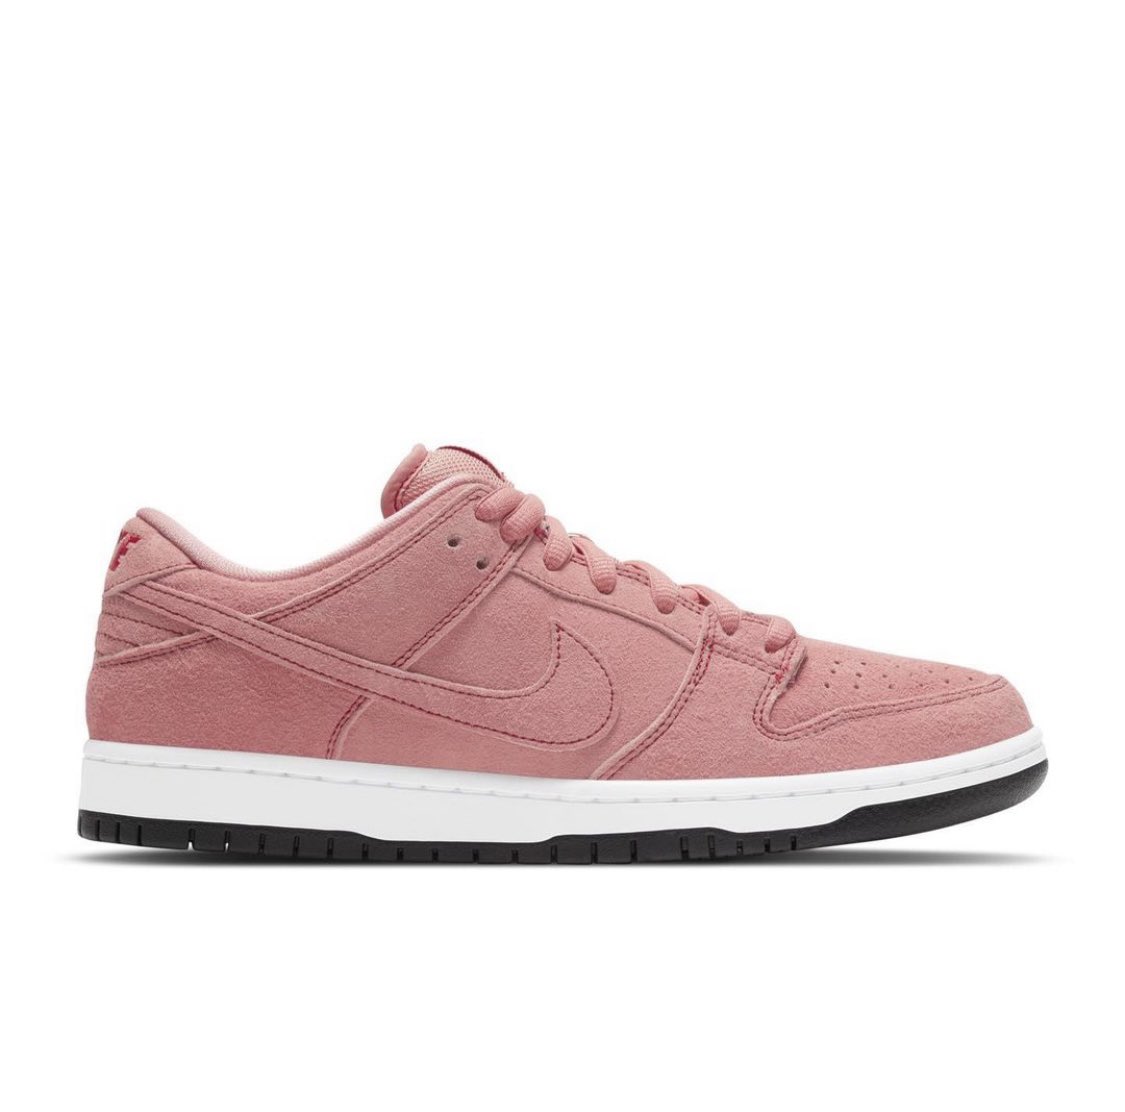 Official pics of the upcoming Pink Pig Dunk low. Inspired by the Pink Pig Porsche racing car and following the name, they are made with Pig suede. Starting to hit Asia now so hopefully they hit other regions soon. These are inline (GR) for February so no set release date in US